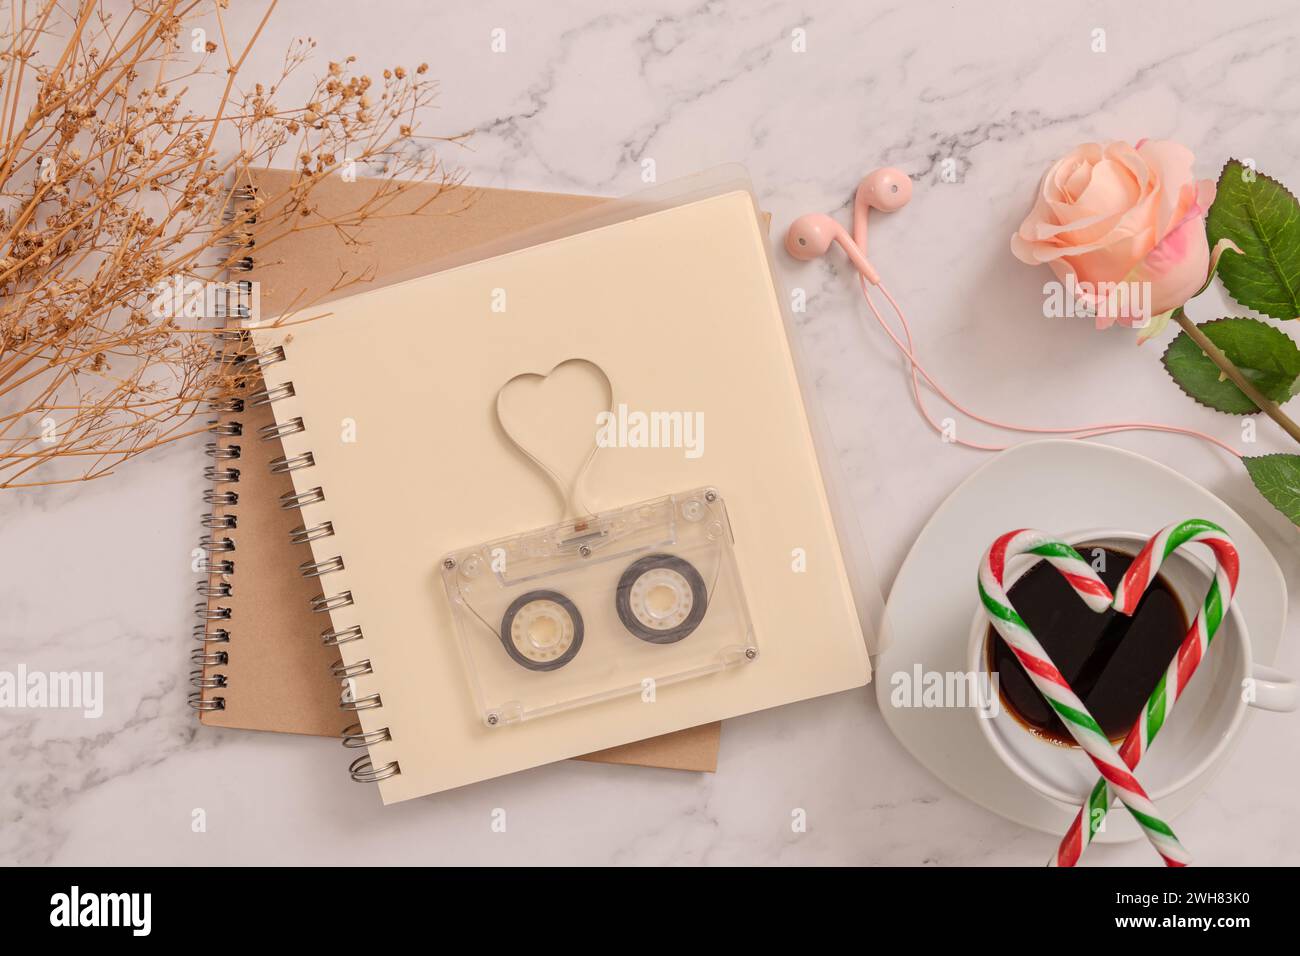 vintage transparent audio cassette with magnetic tape in shape of heart on blank book page, candy canes in the shape of heart on coffee cup, earphones Stock Photo